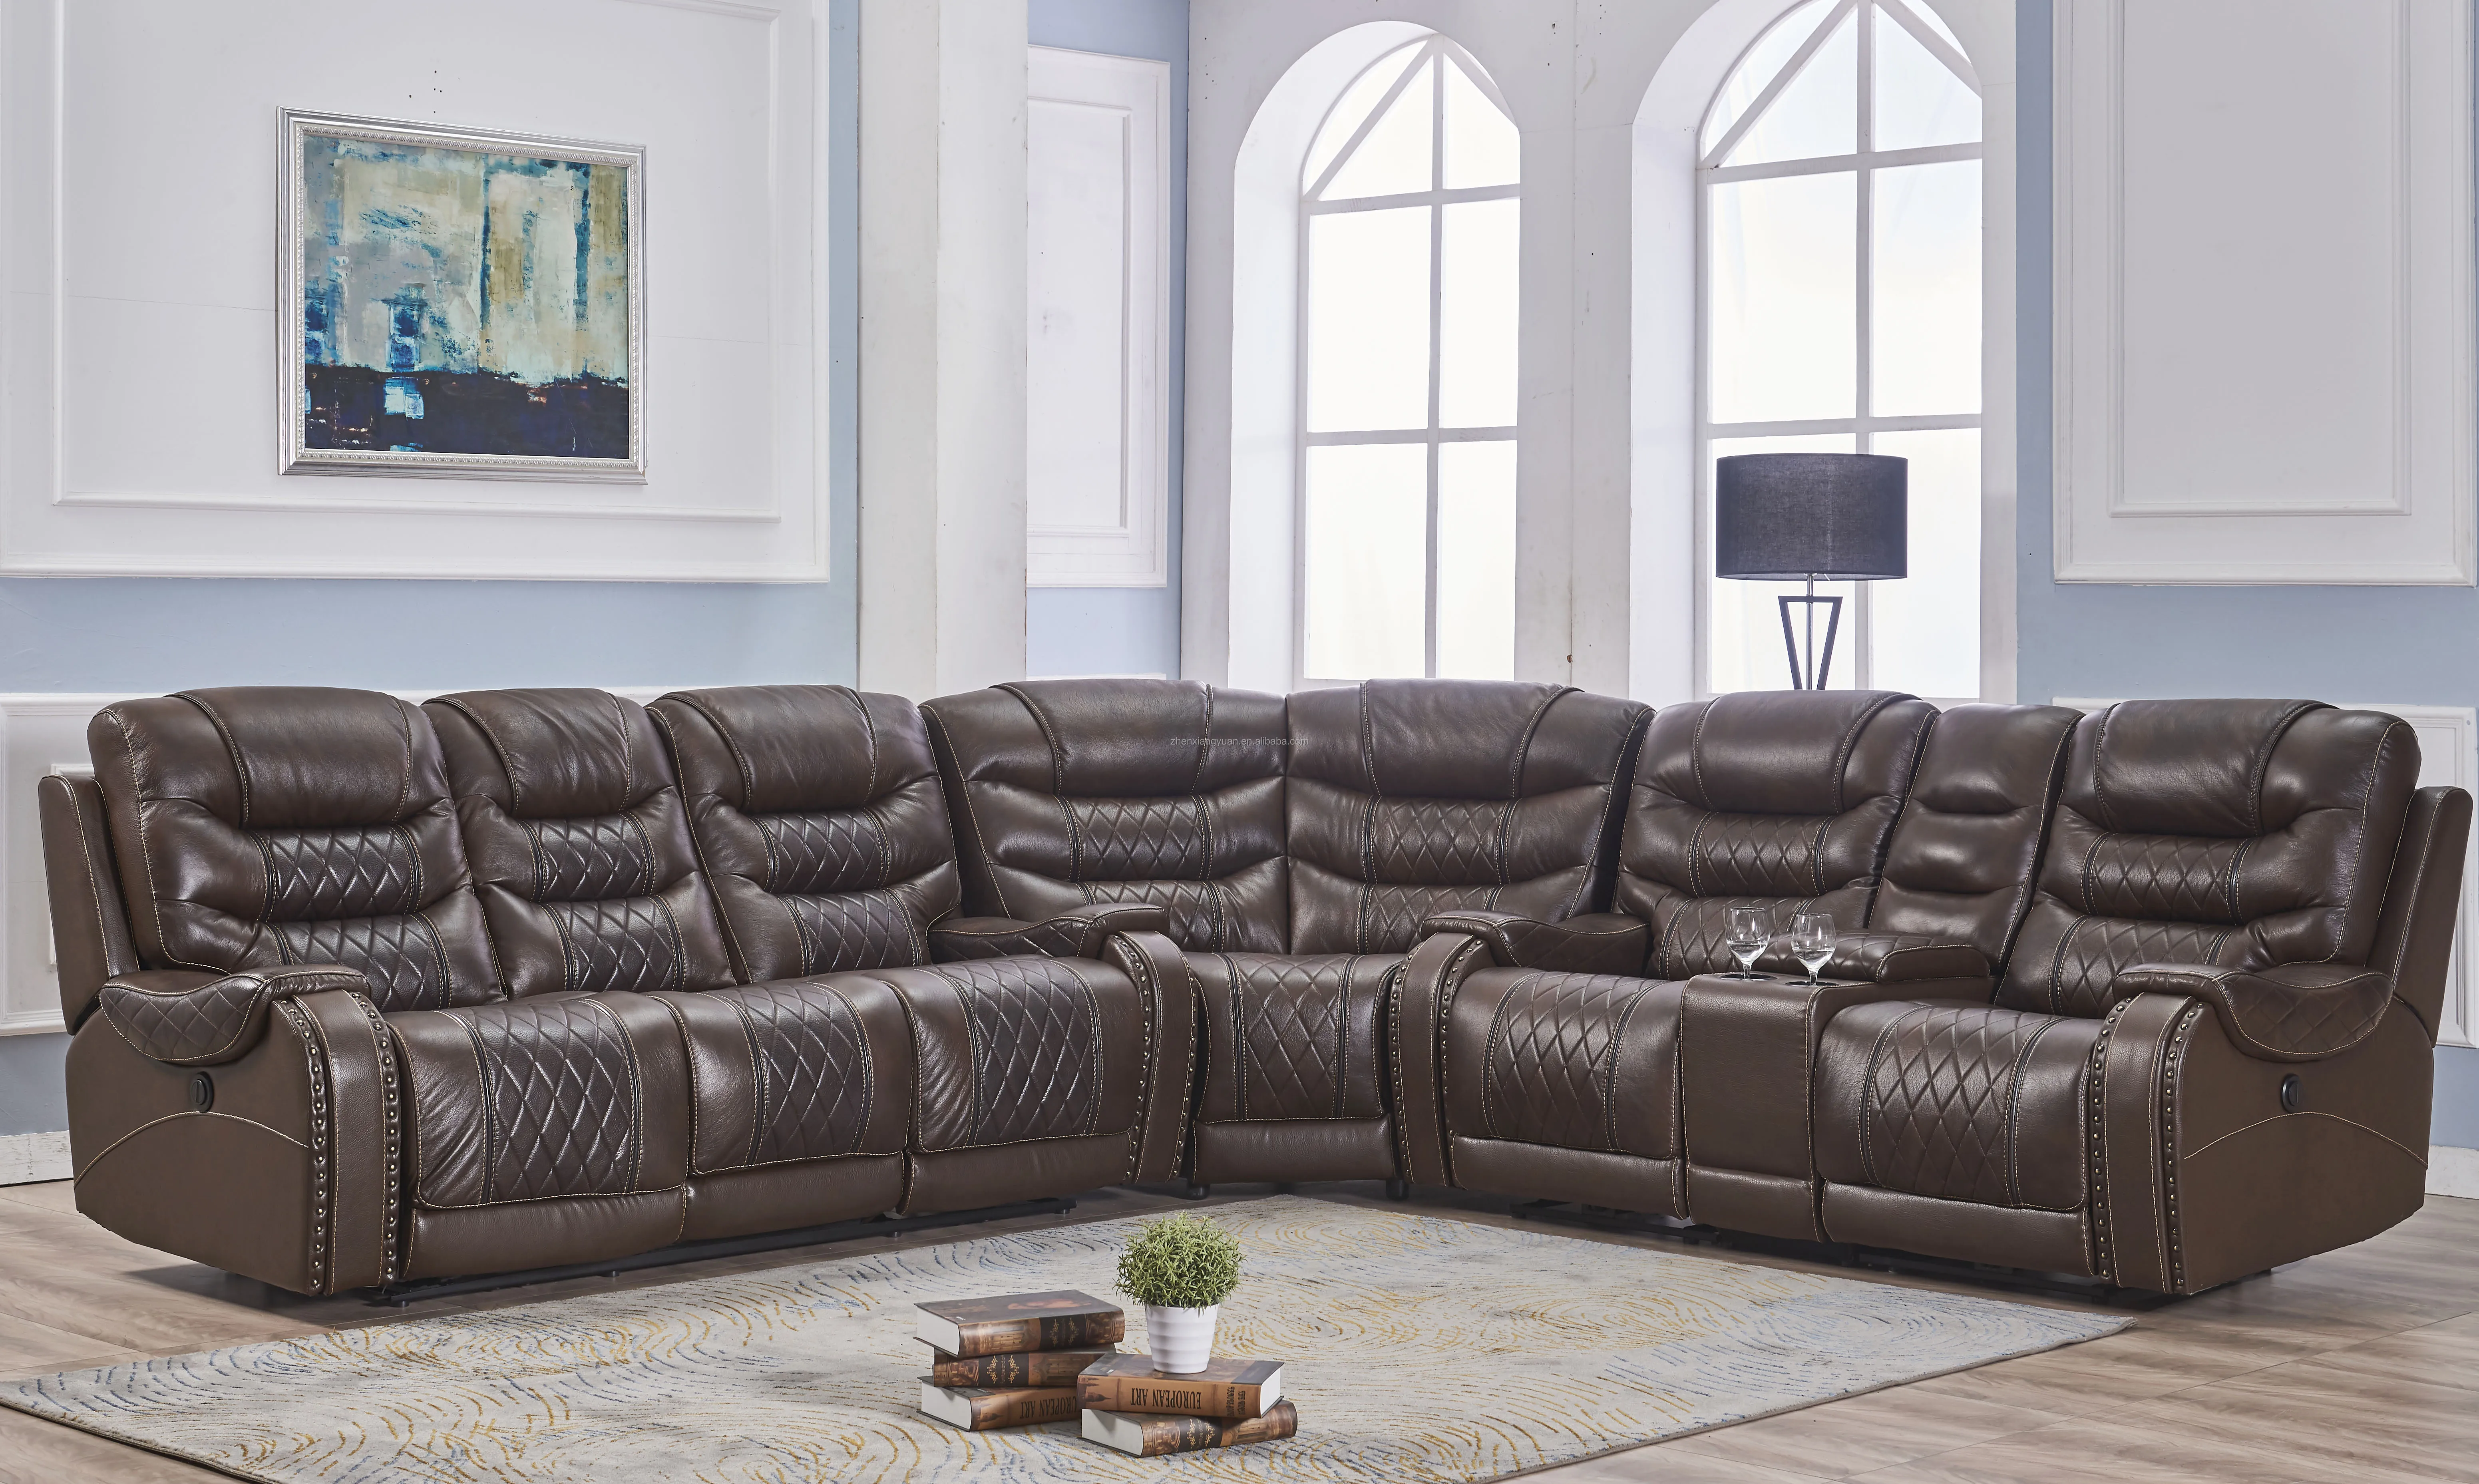 Home Furniture sofas modern recliner sectional sofa with  leather Air brown color